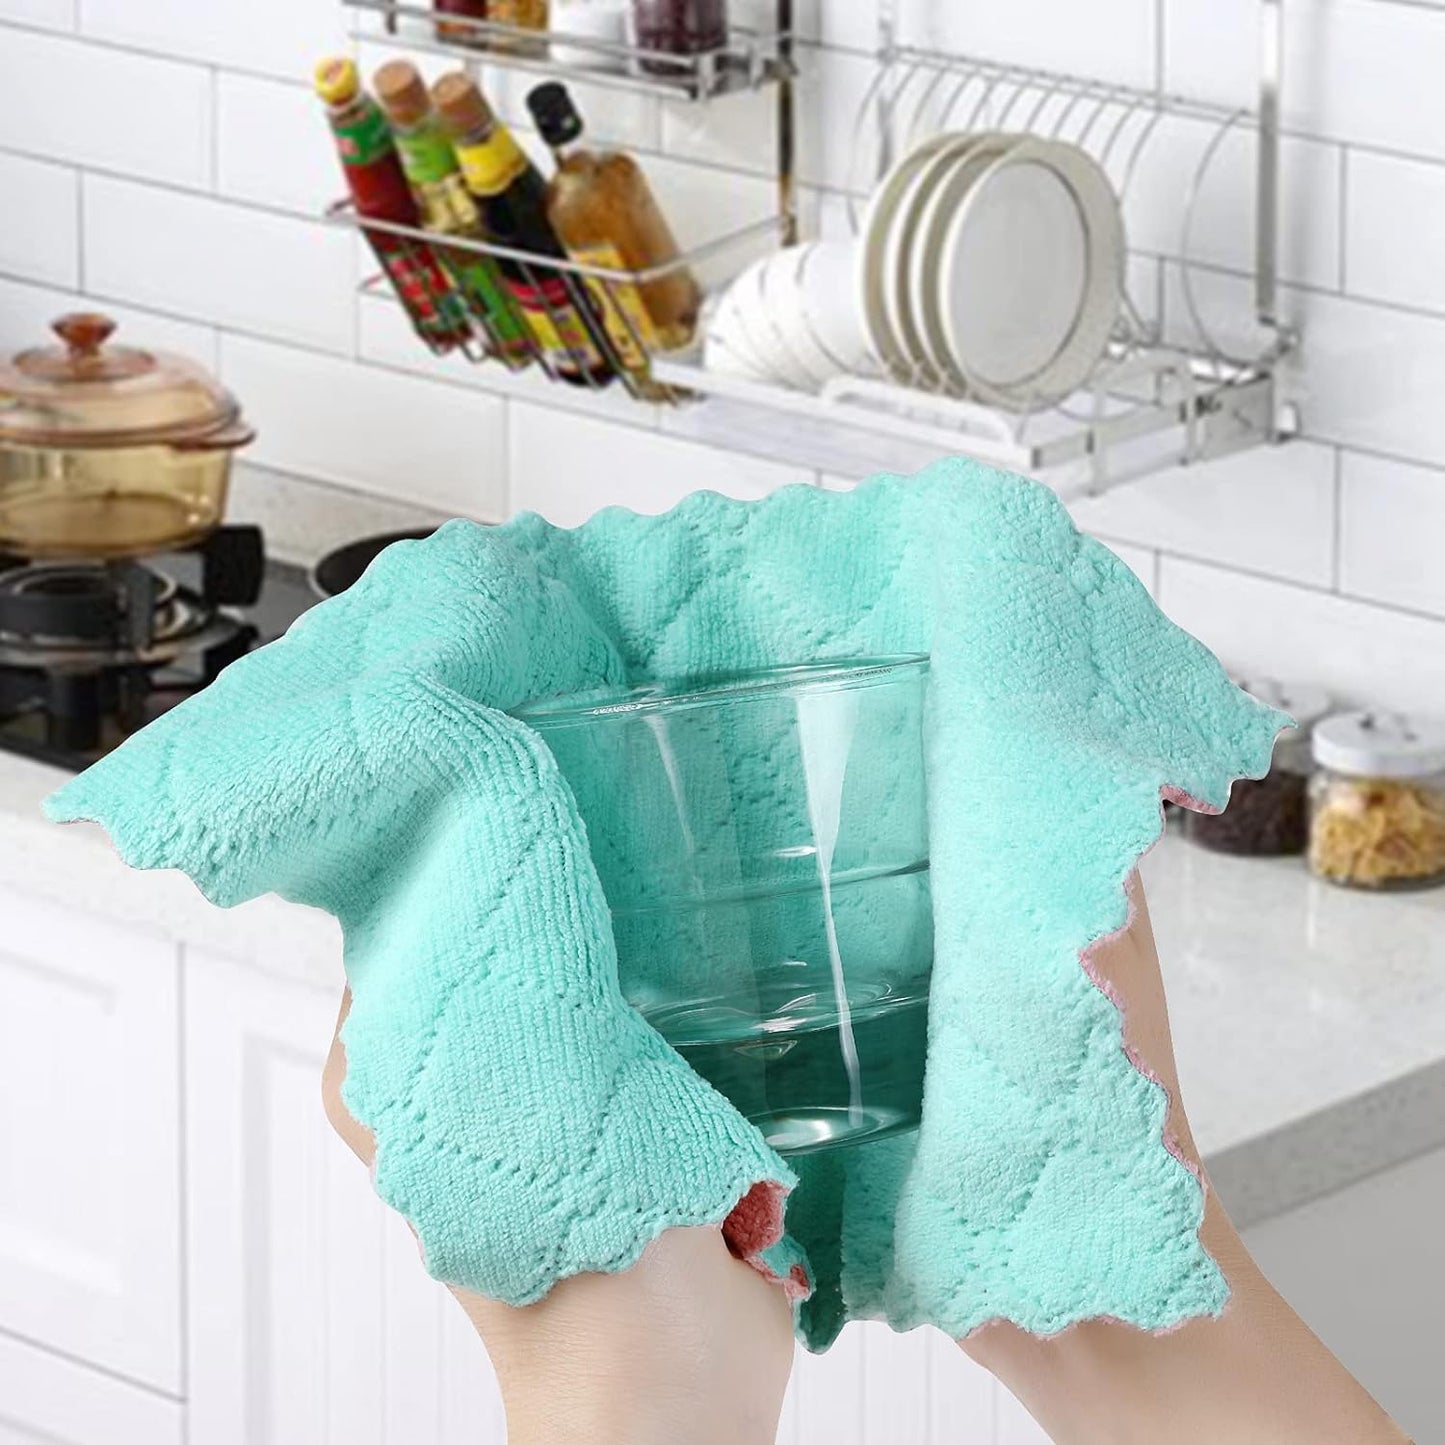 20 Pack Kitchen Dish Cloths Dish Towels,Super Absorbent Coral Fleece Cloth,Premium Cleaning Cloth,Nonstick Oil Washable Fast Drying Dish Rags for Clean Table,Dish,Glass（5Colors 6"x10"）